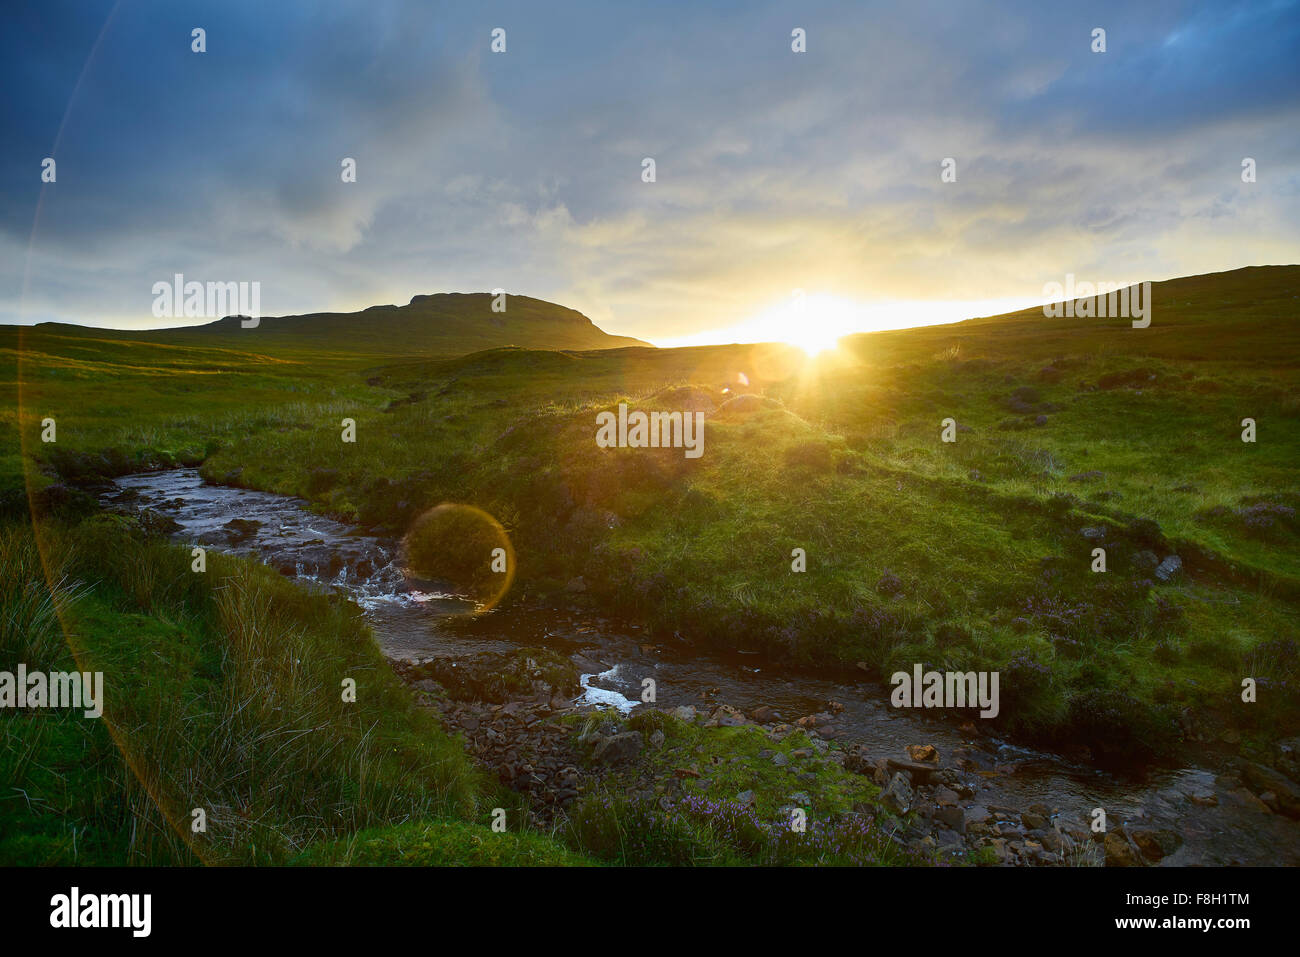 Sunrise over rural hills and stream Stock Photo